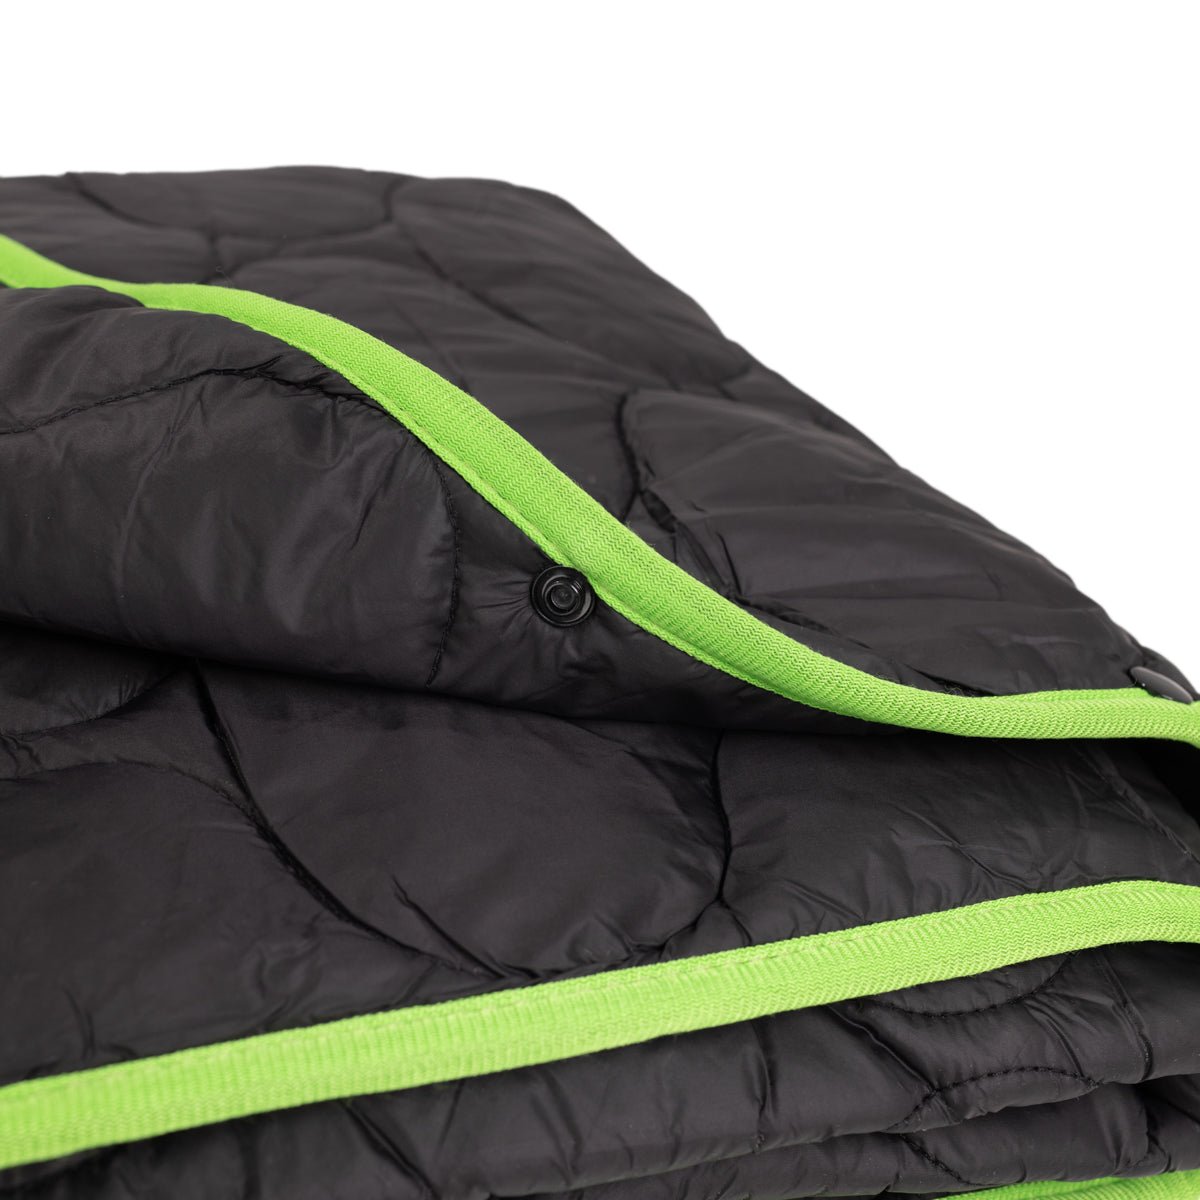 Puffy Camping Blanket - Groove Rabbit